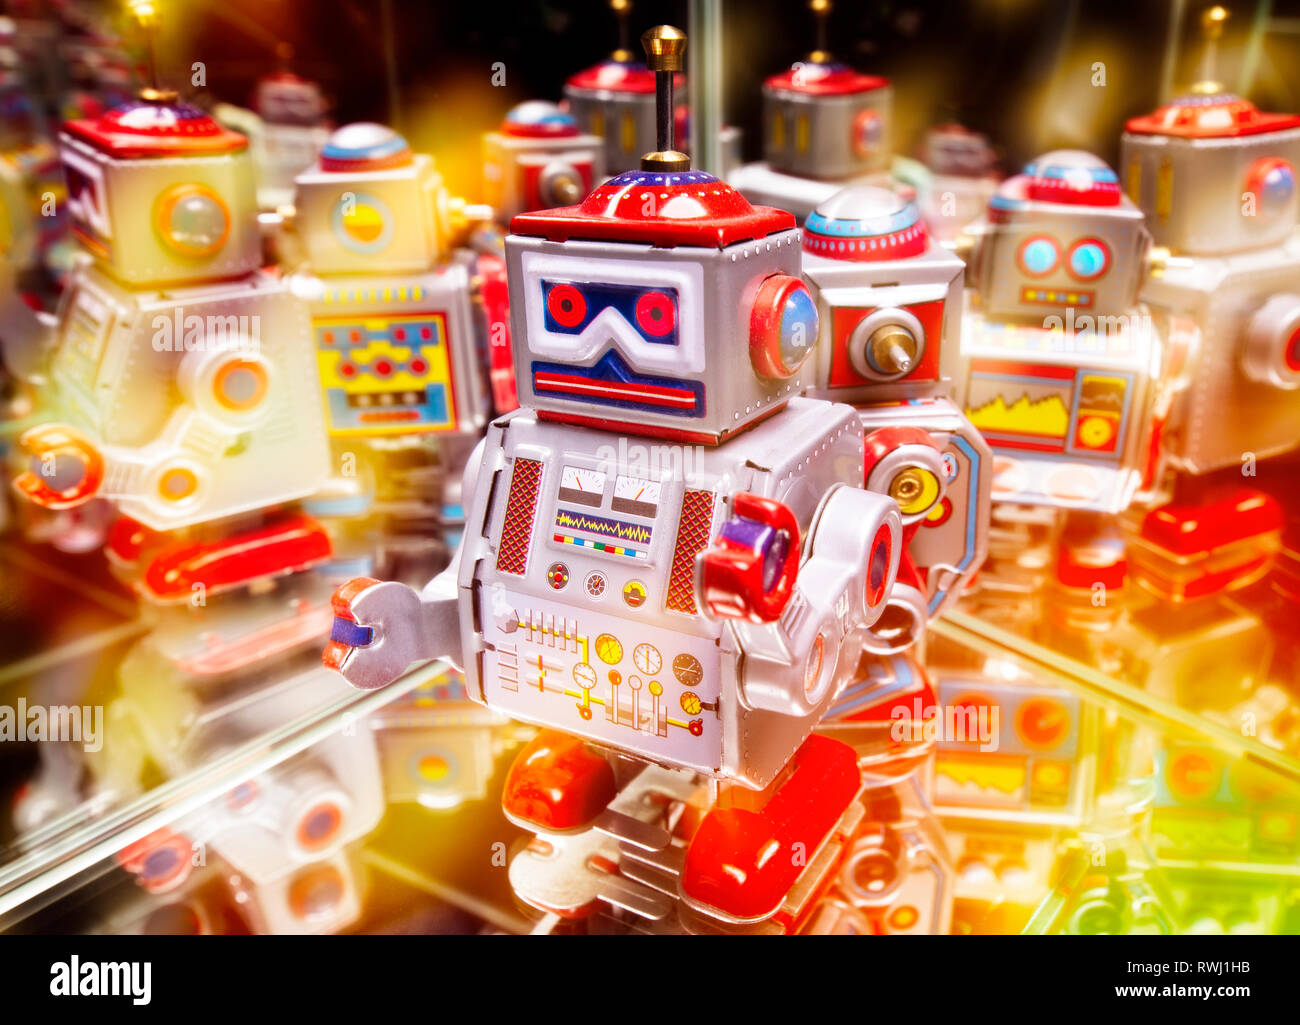 Robots with reflections and various colored lights Stock Photo